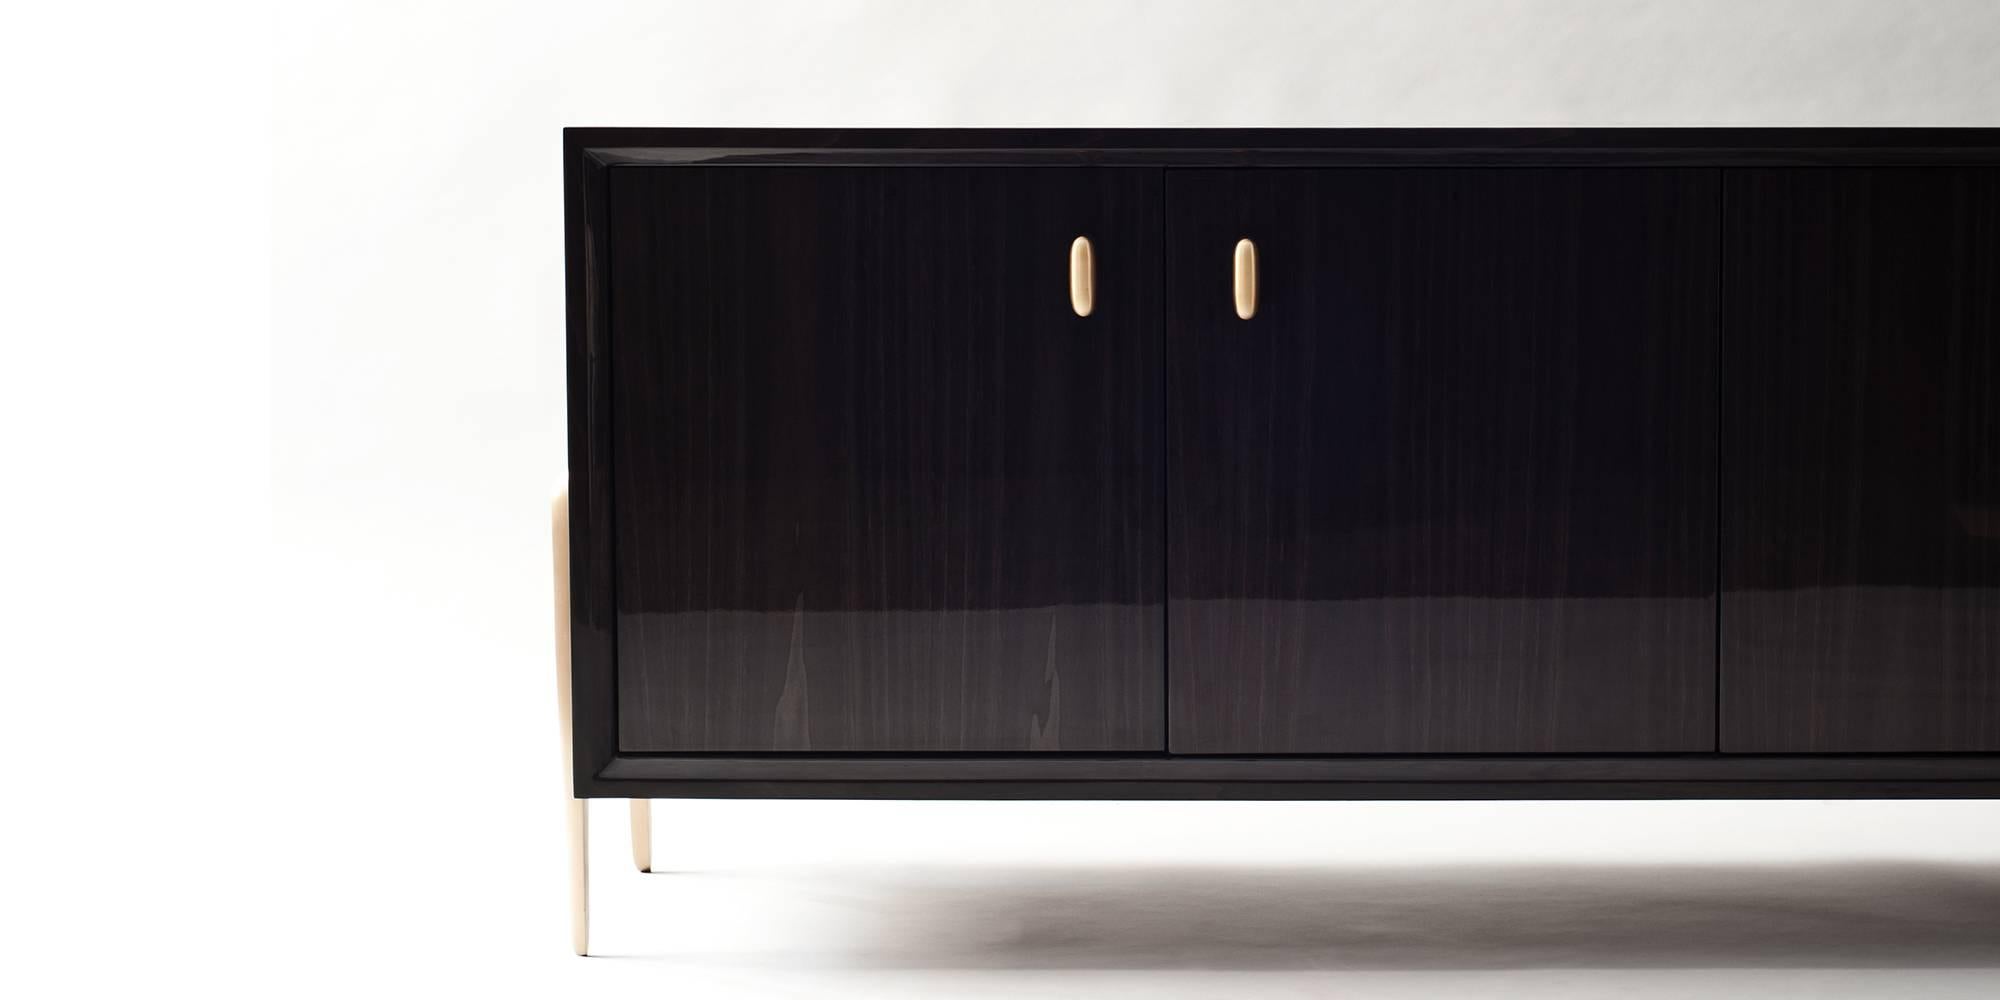 The Serge cabinet by DeMuro Das has a clean-lined body veneered in glossy dark grey dyed Tulipwood, an unusual species with a straight, finely-textured grain. The sculptural legs are mounted from each side of the cabinet and have been hand-cast in